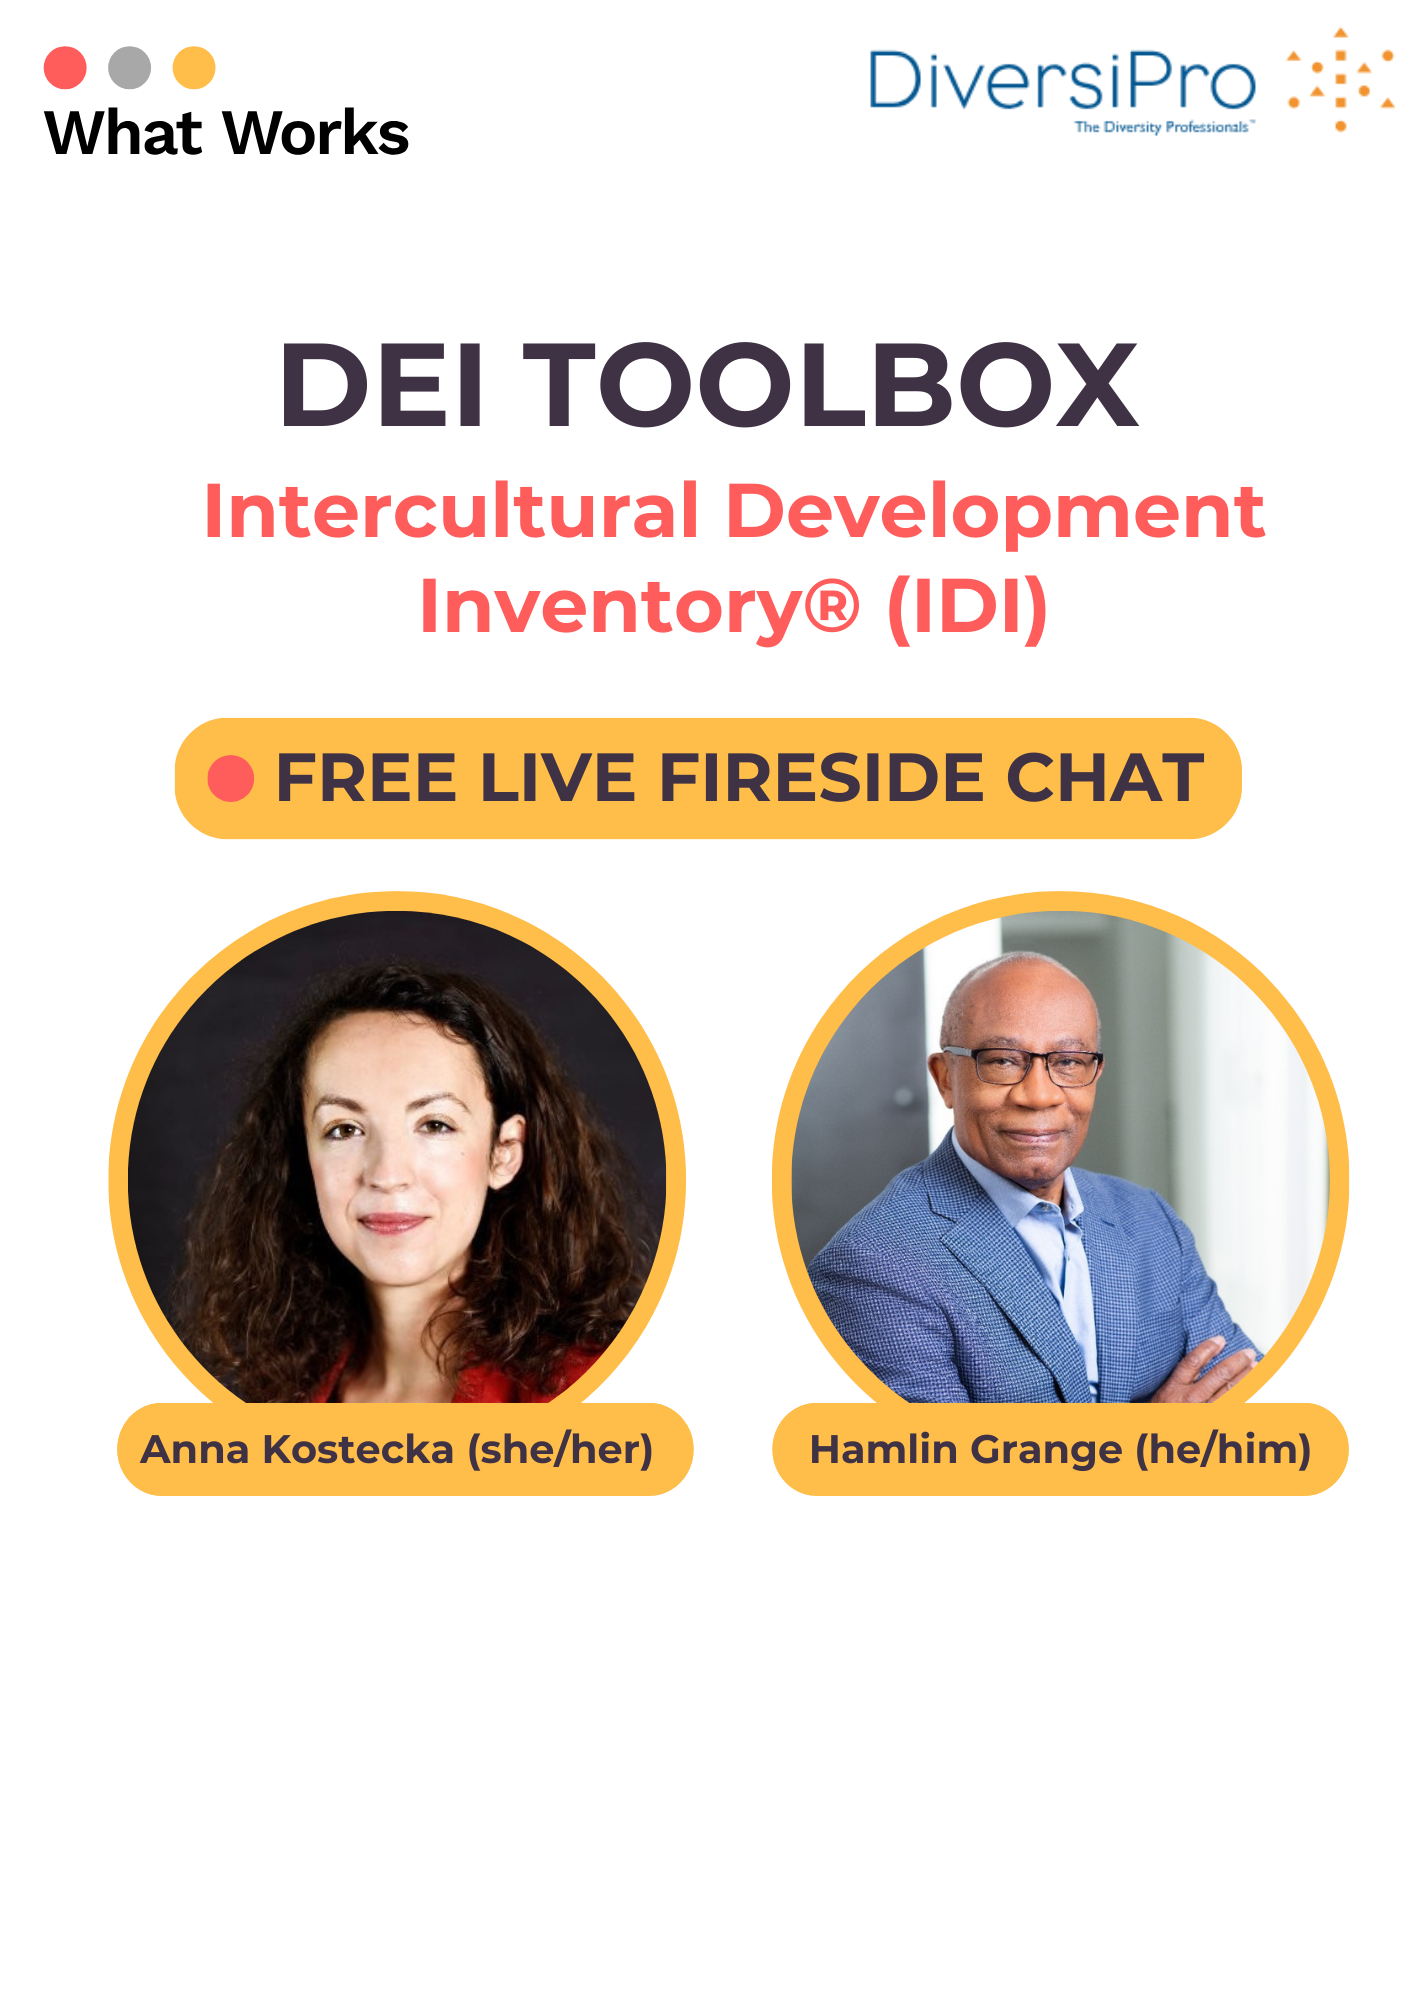 Landing page of a fireside chat called DEI toolbox: Intercultural Development Inventory (IDI) with photos of spearkers - Anna Kostecka and Hamlin Grange